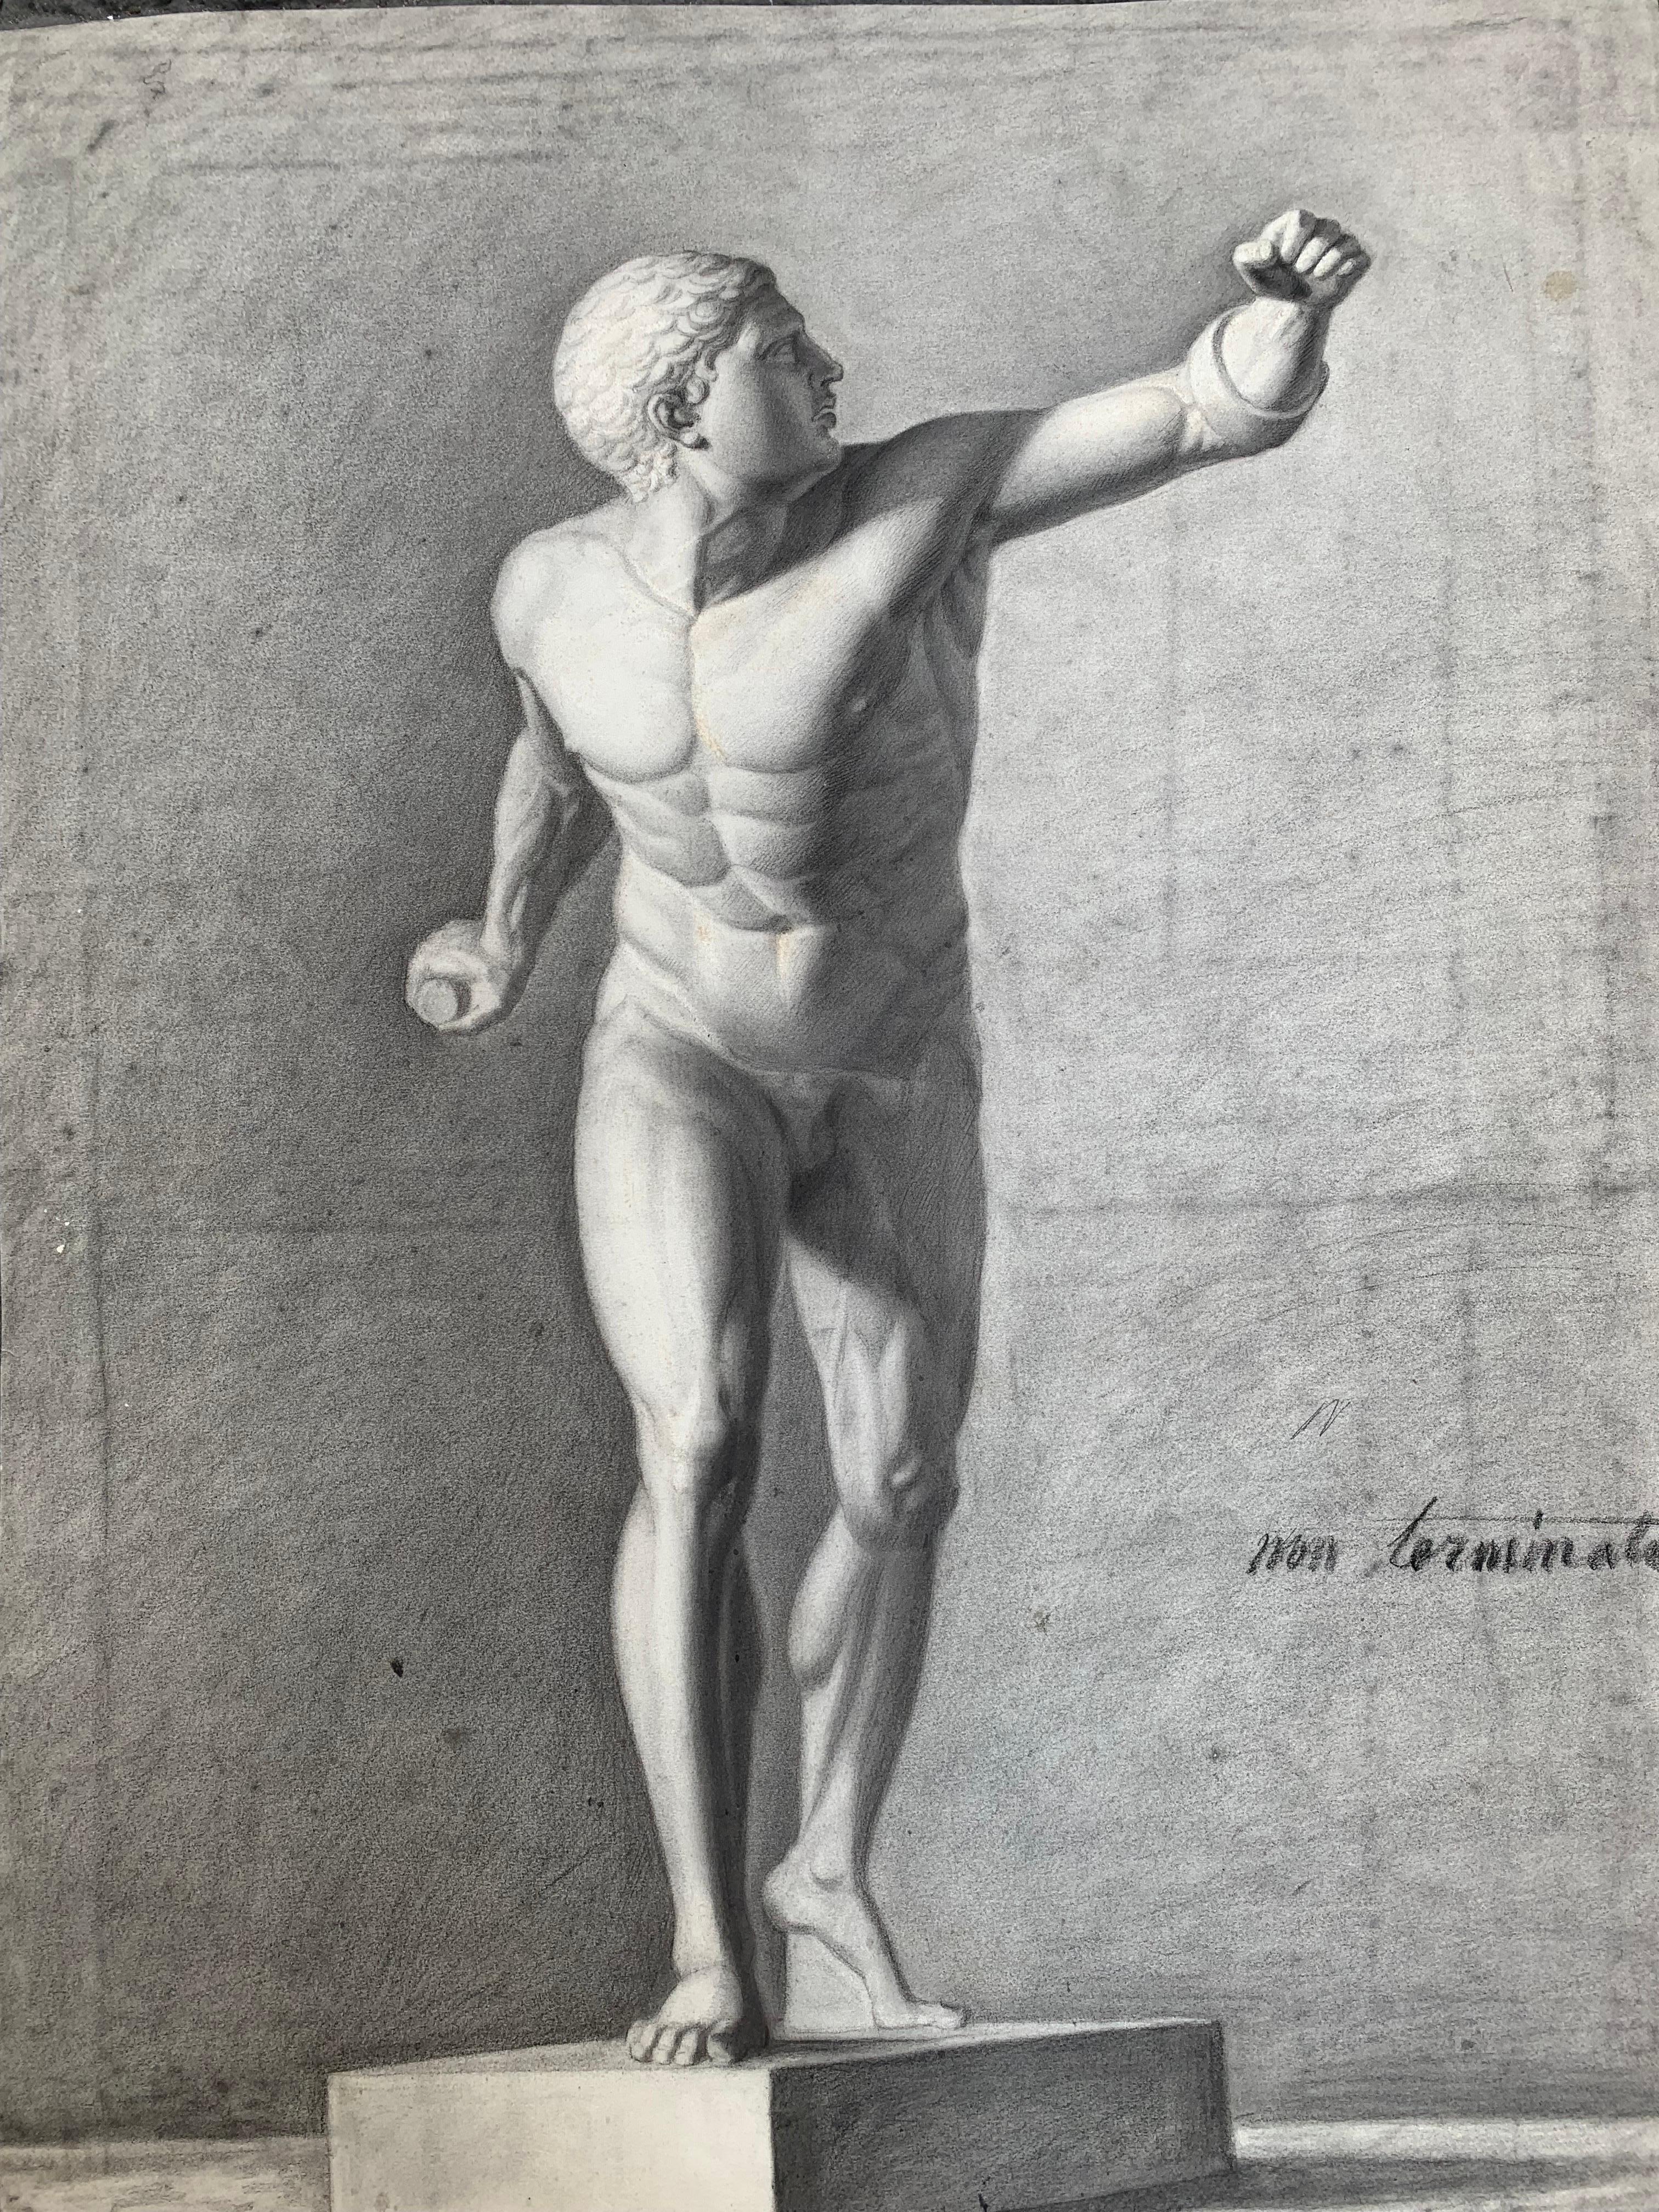 Gladiator from Borghese Gallery. 
Mid XIX century academic drawing.

Black charcoal on paper.

Dimensions : cm 65 x cm 48

Statue of a gladiator from the Borghese Gallery.

Excellent conservation conditions. 

This drawing represents one of the many